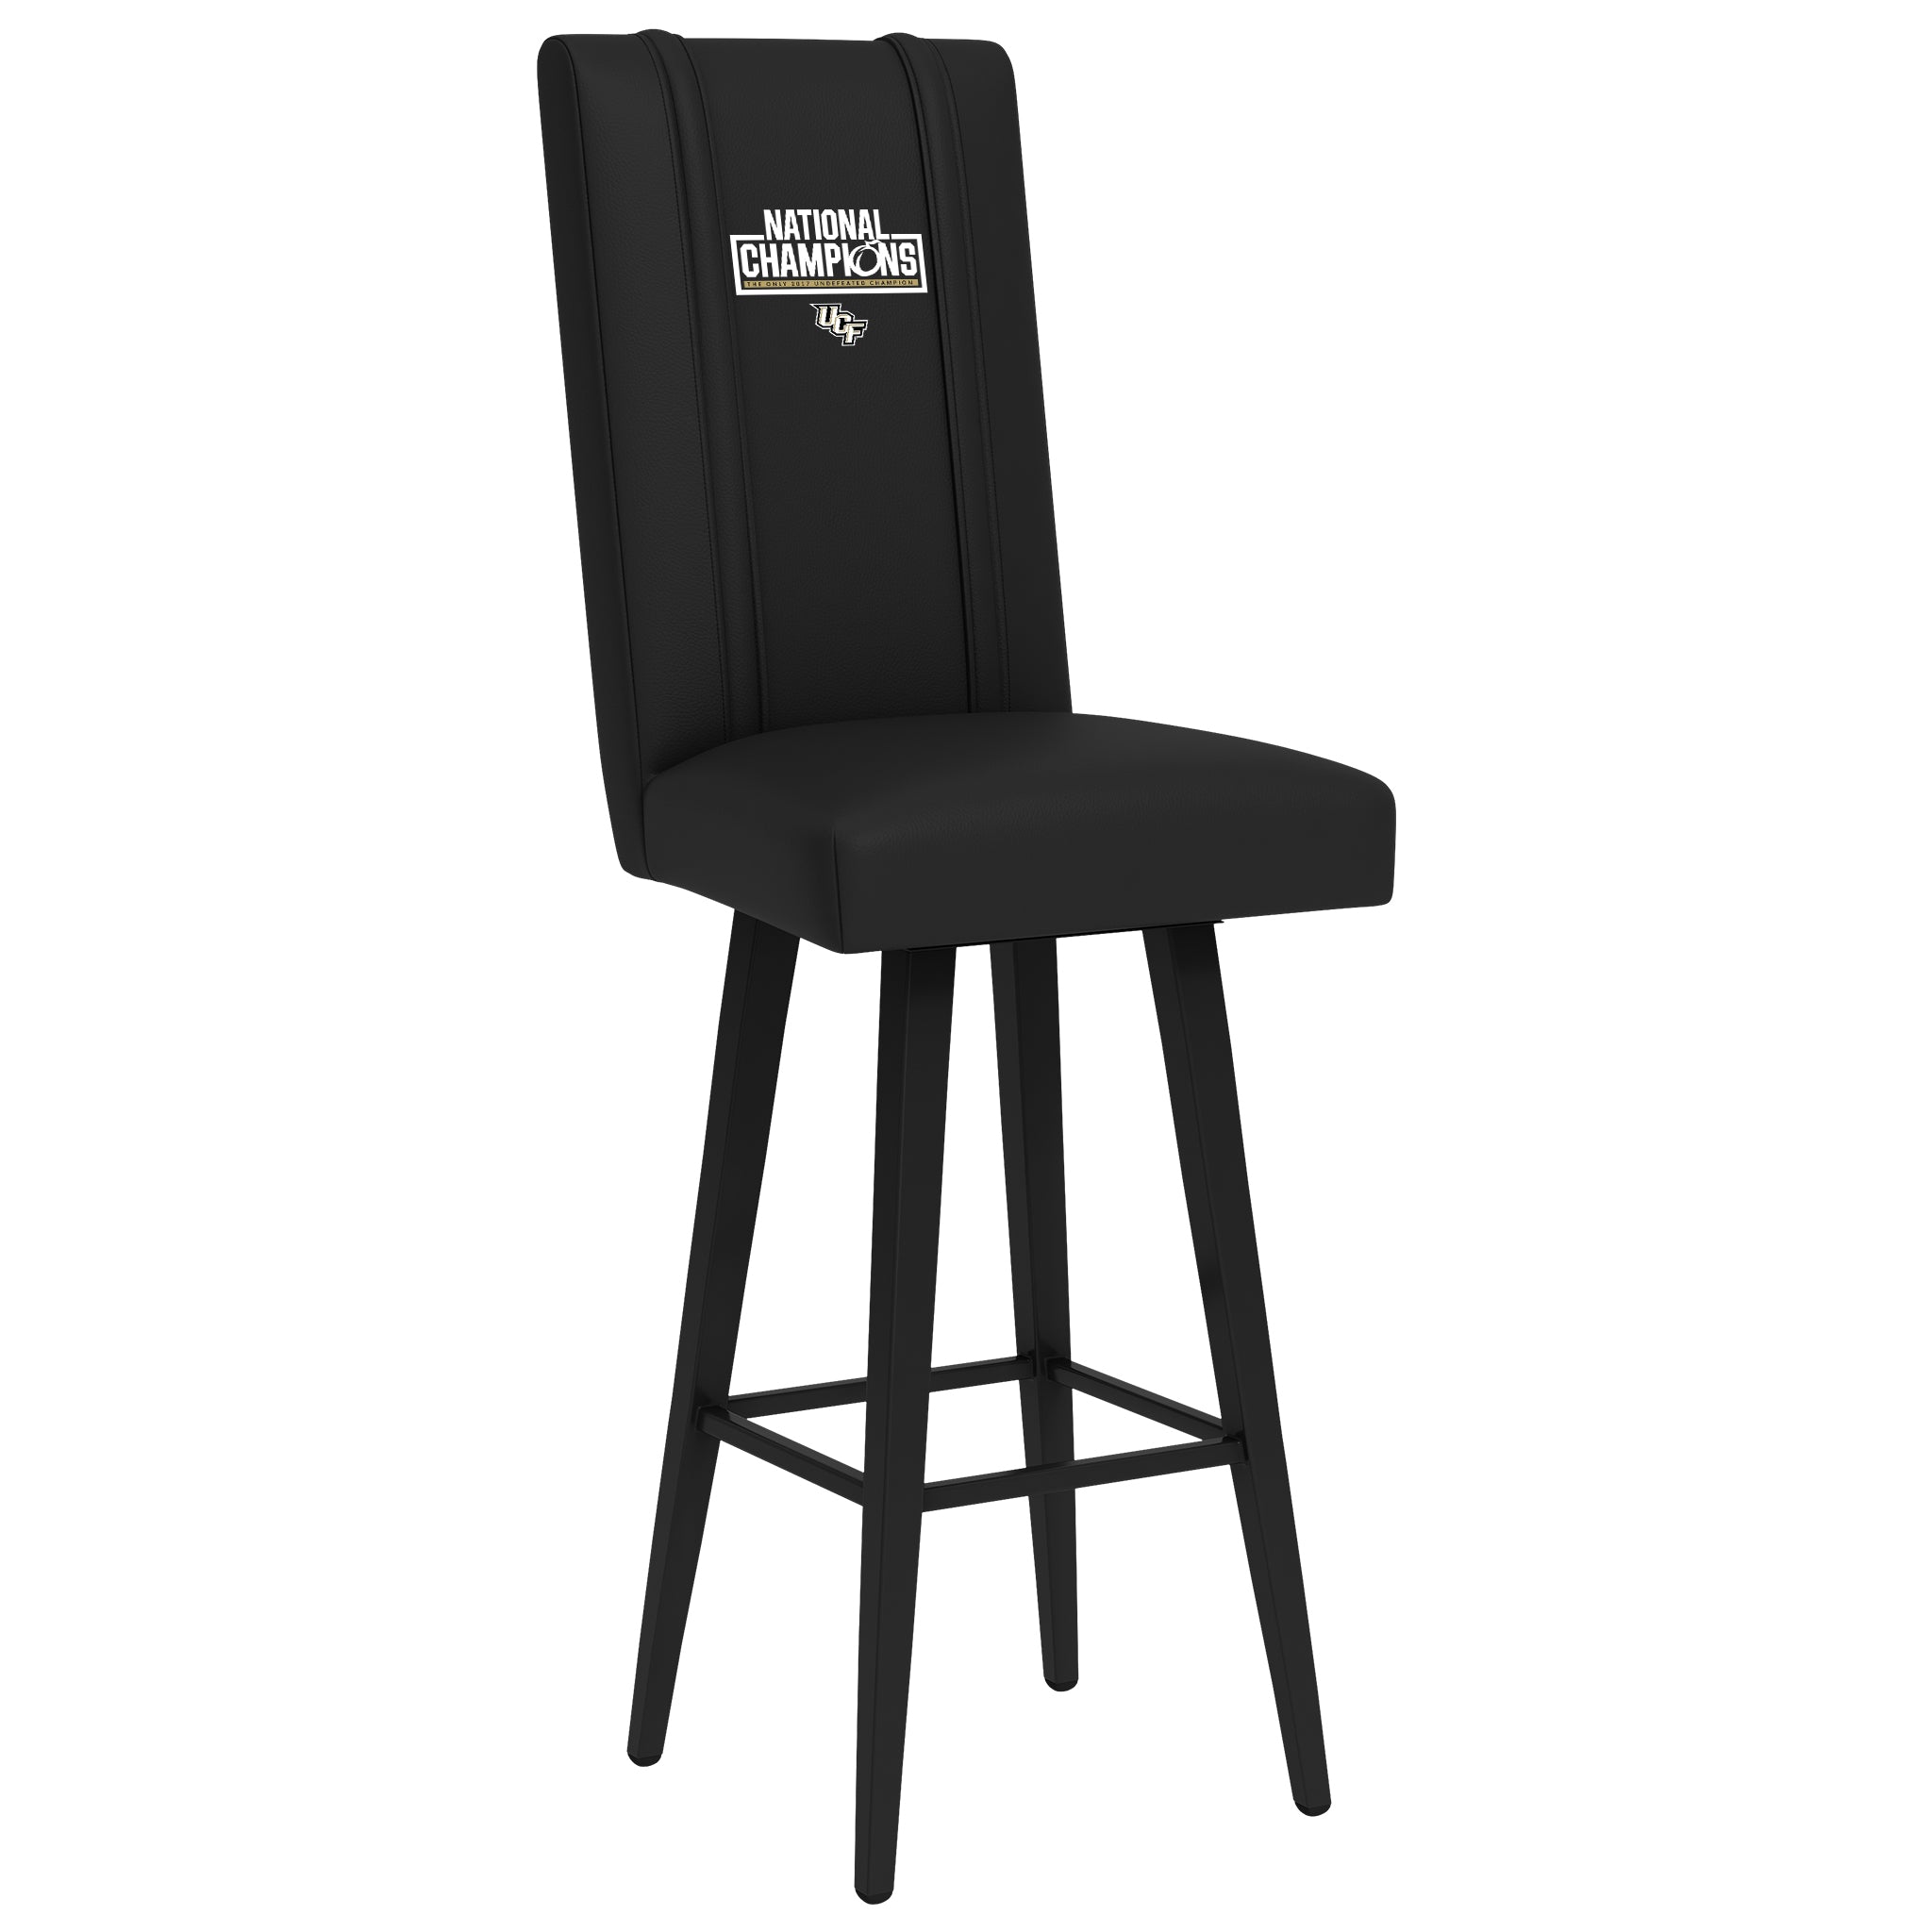 Ucf National Champions Swivel Bar Stool With Ucf National Champions Logo Panel